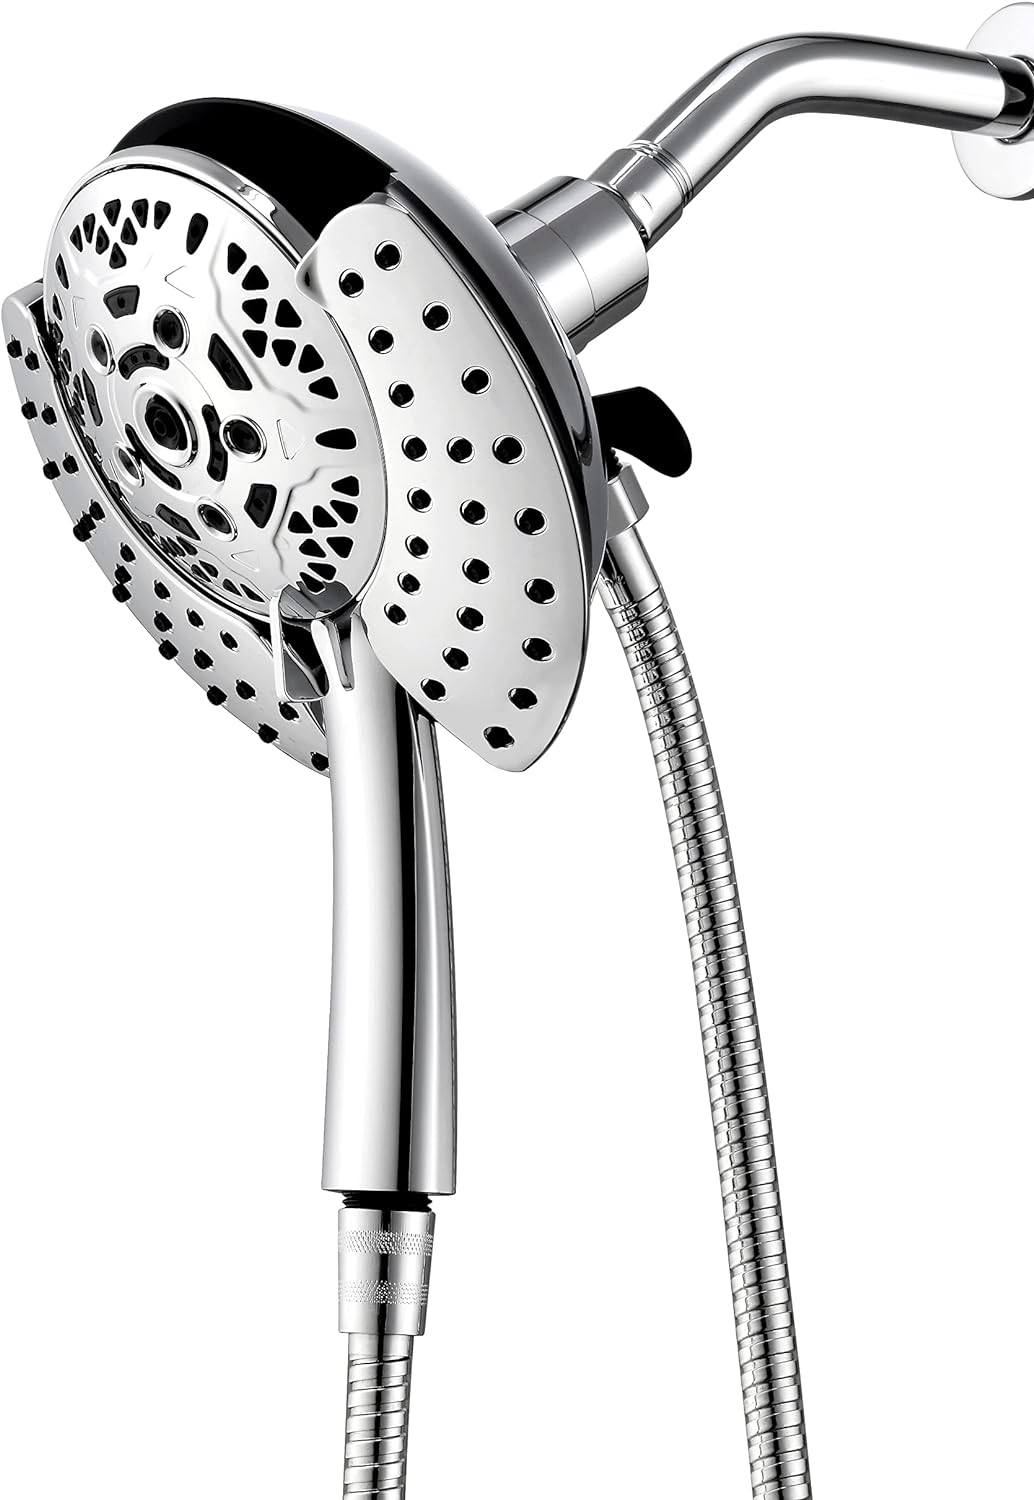 This is easily the best showerhead out there in this price range.It has a ton of pressure. It' very wide which allows a ton of water to fall on you and I mean a lot.Many customizable settings on it and installation is simple.It is also aesthetically nice as far as showerheads go. Also has a cool slide-in feature when you take on or off the showerhead.Easy buy and would buy again.